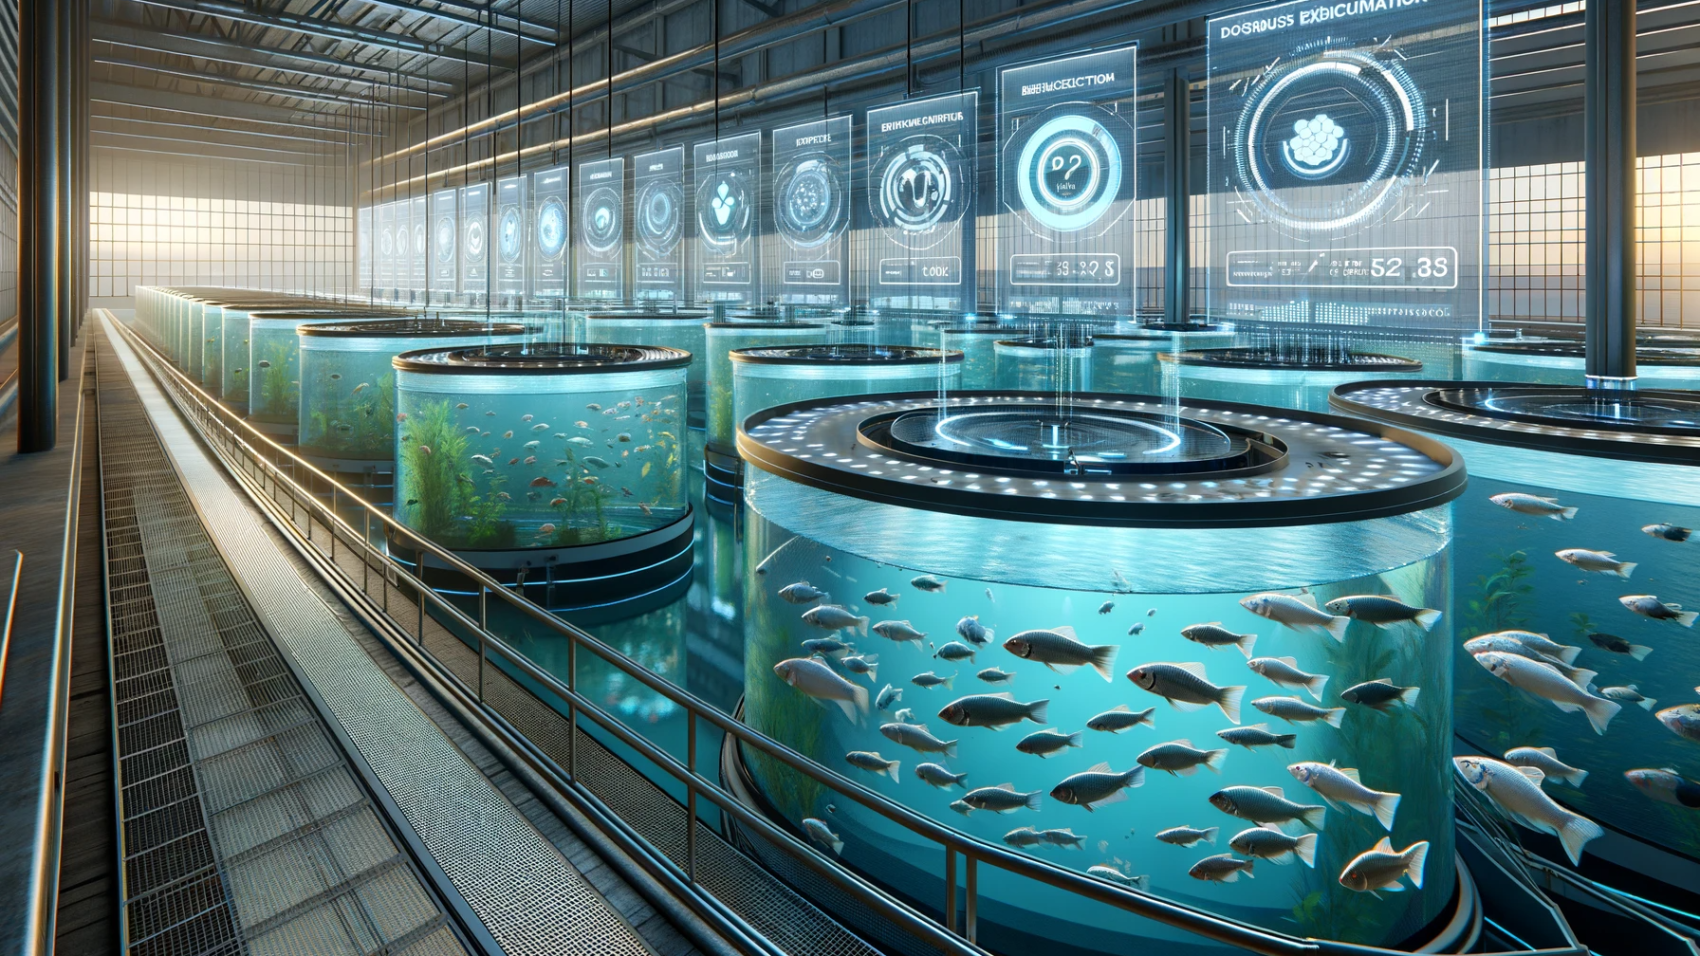 DALL·E 2023-11-30 03.08.05 - A futuristic aquaculture farm with large fish tanks containing various species of fish. The scene is equipped with advanced technology such as automat